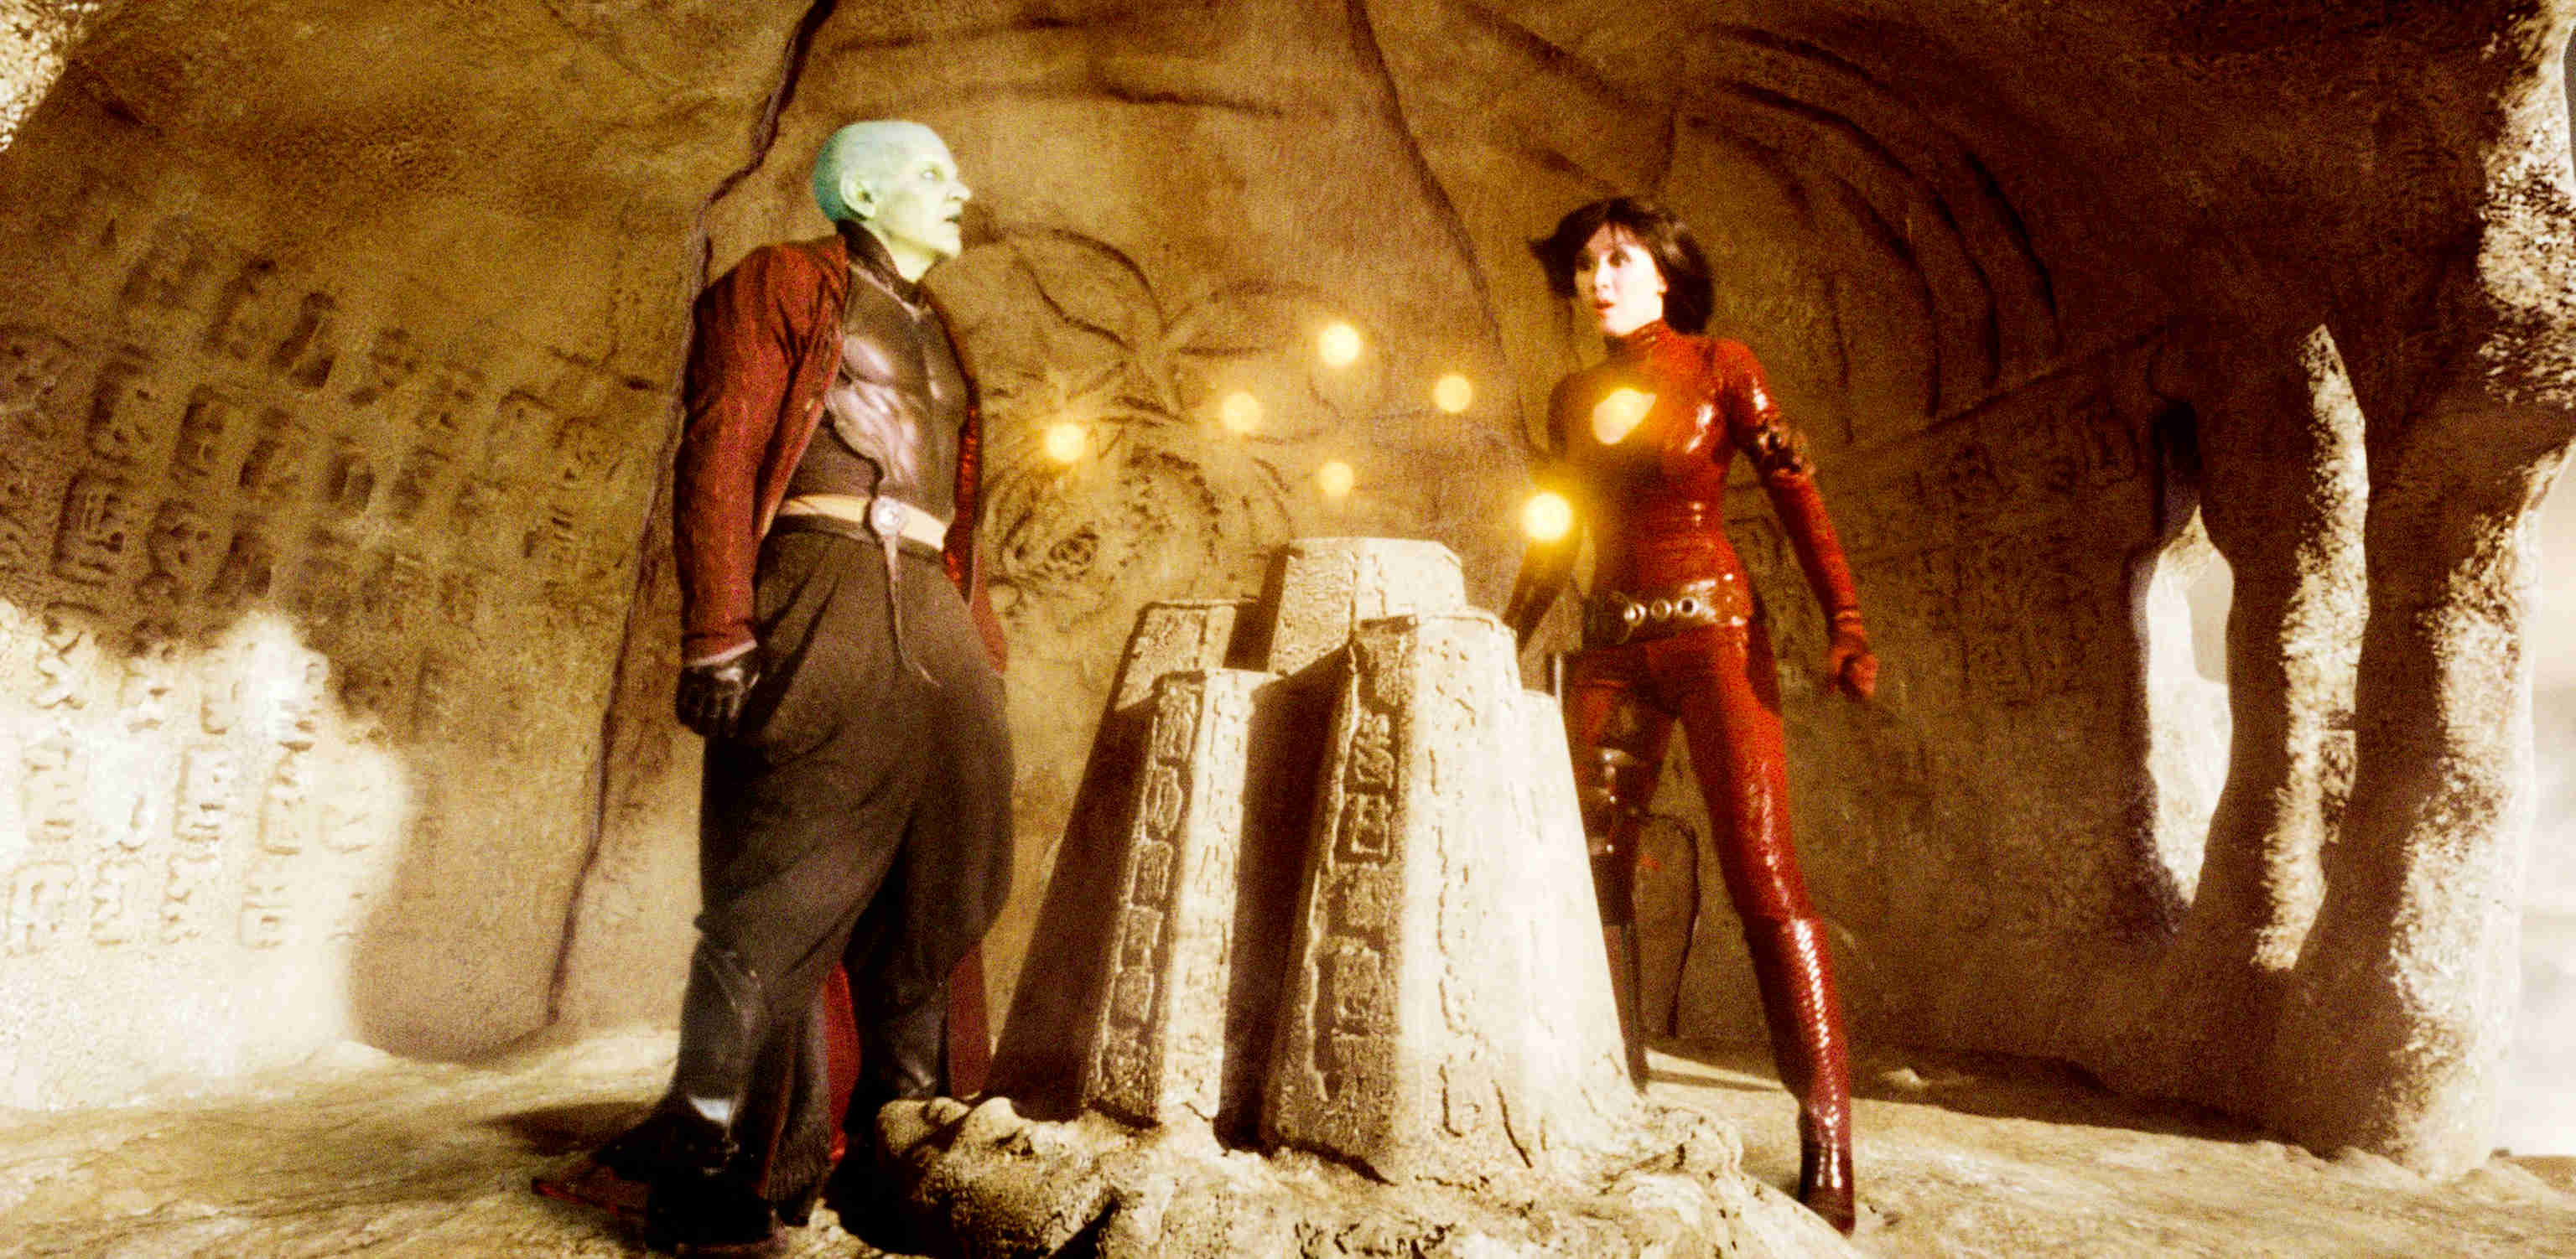 James Marsters stars as Lord Piccolo and Eriko Tamura stars as Mai in The 20th Century Fox Pictures' Dragonball Evolution (2009)